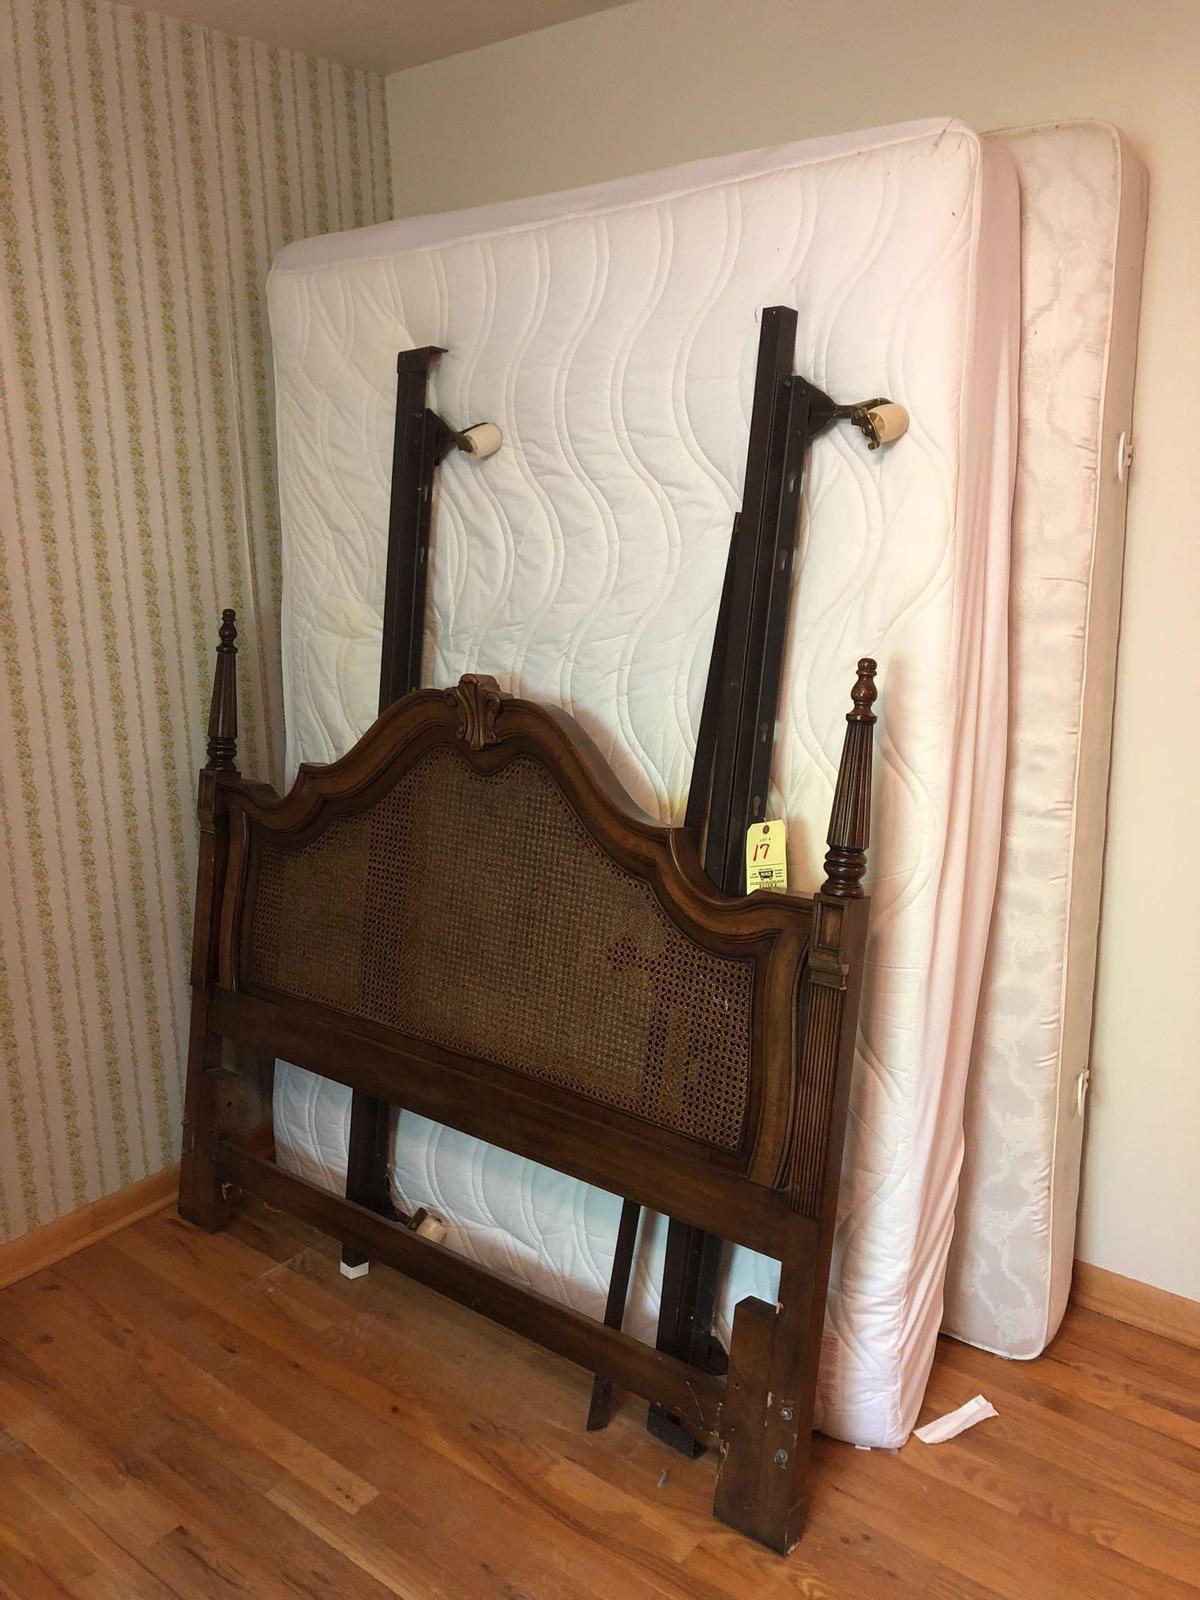 Queen size bed/Hollywood Frame